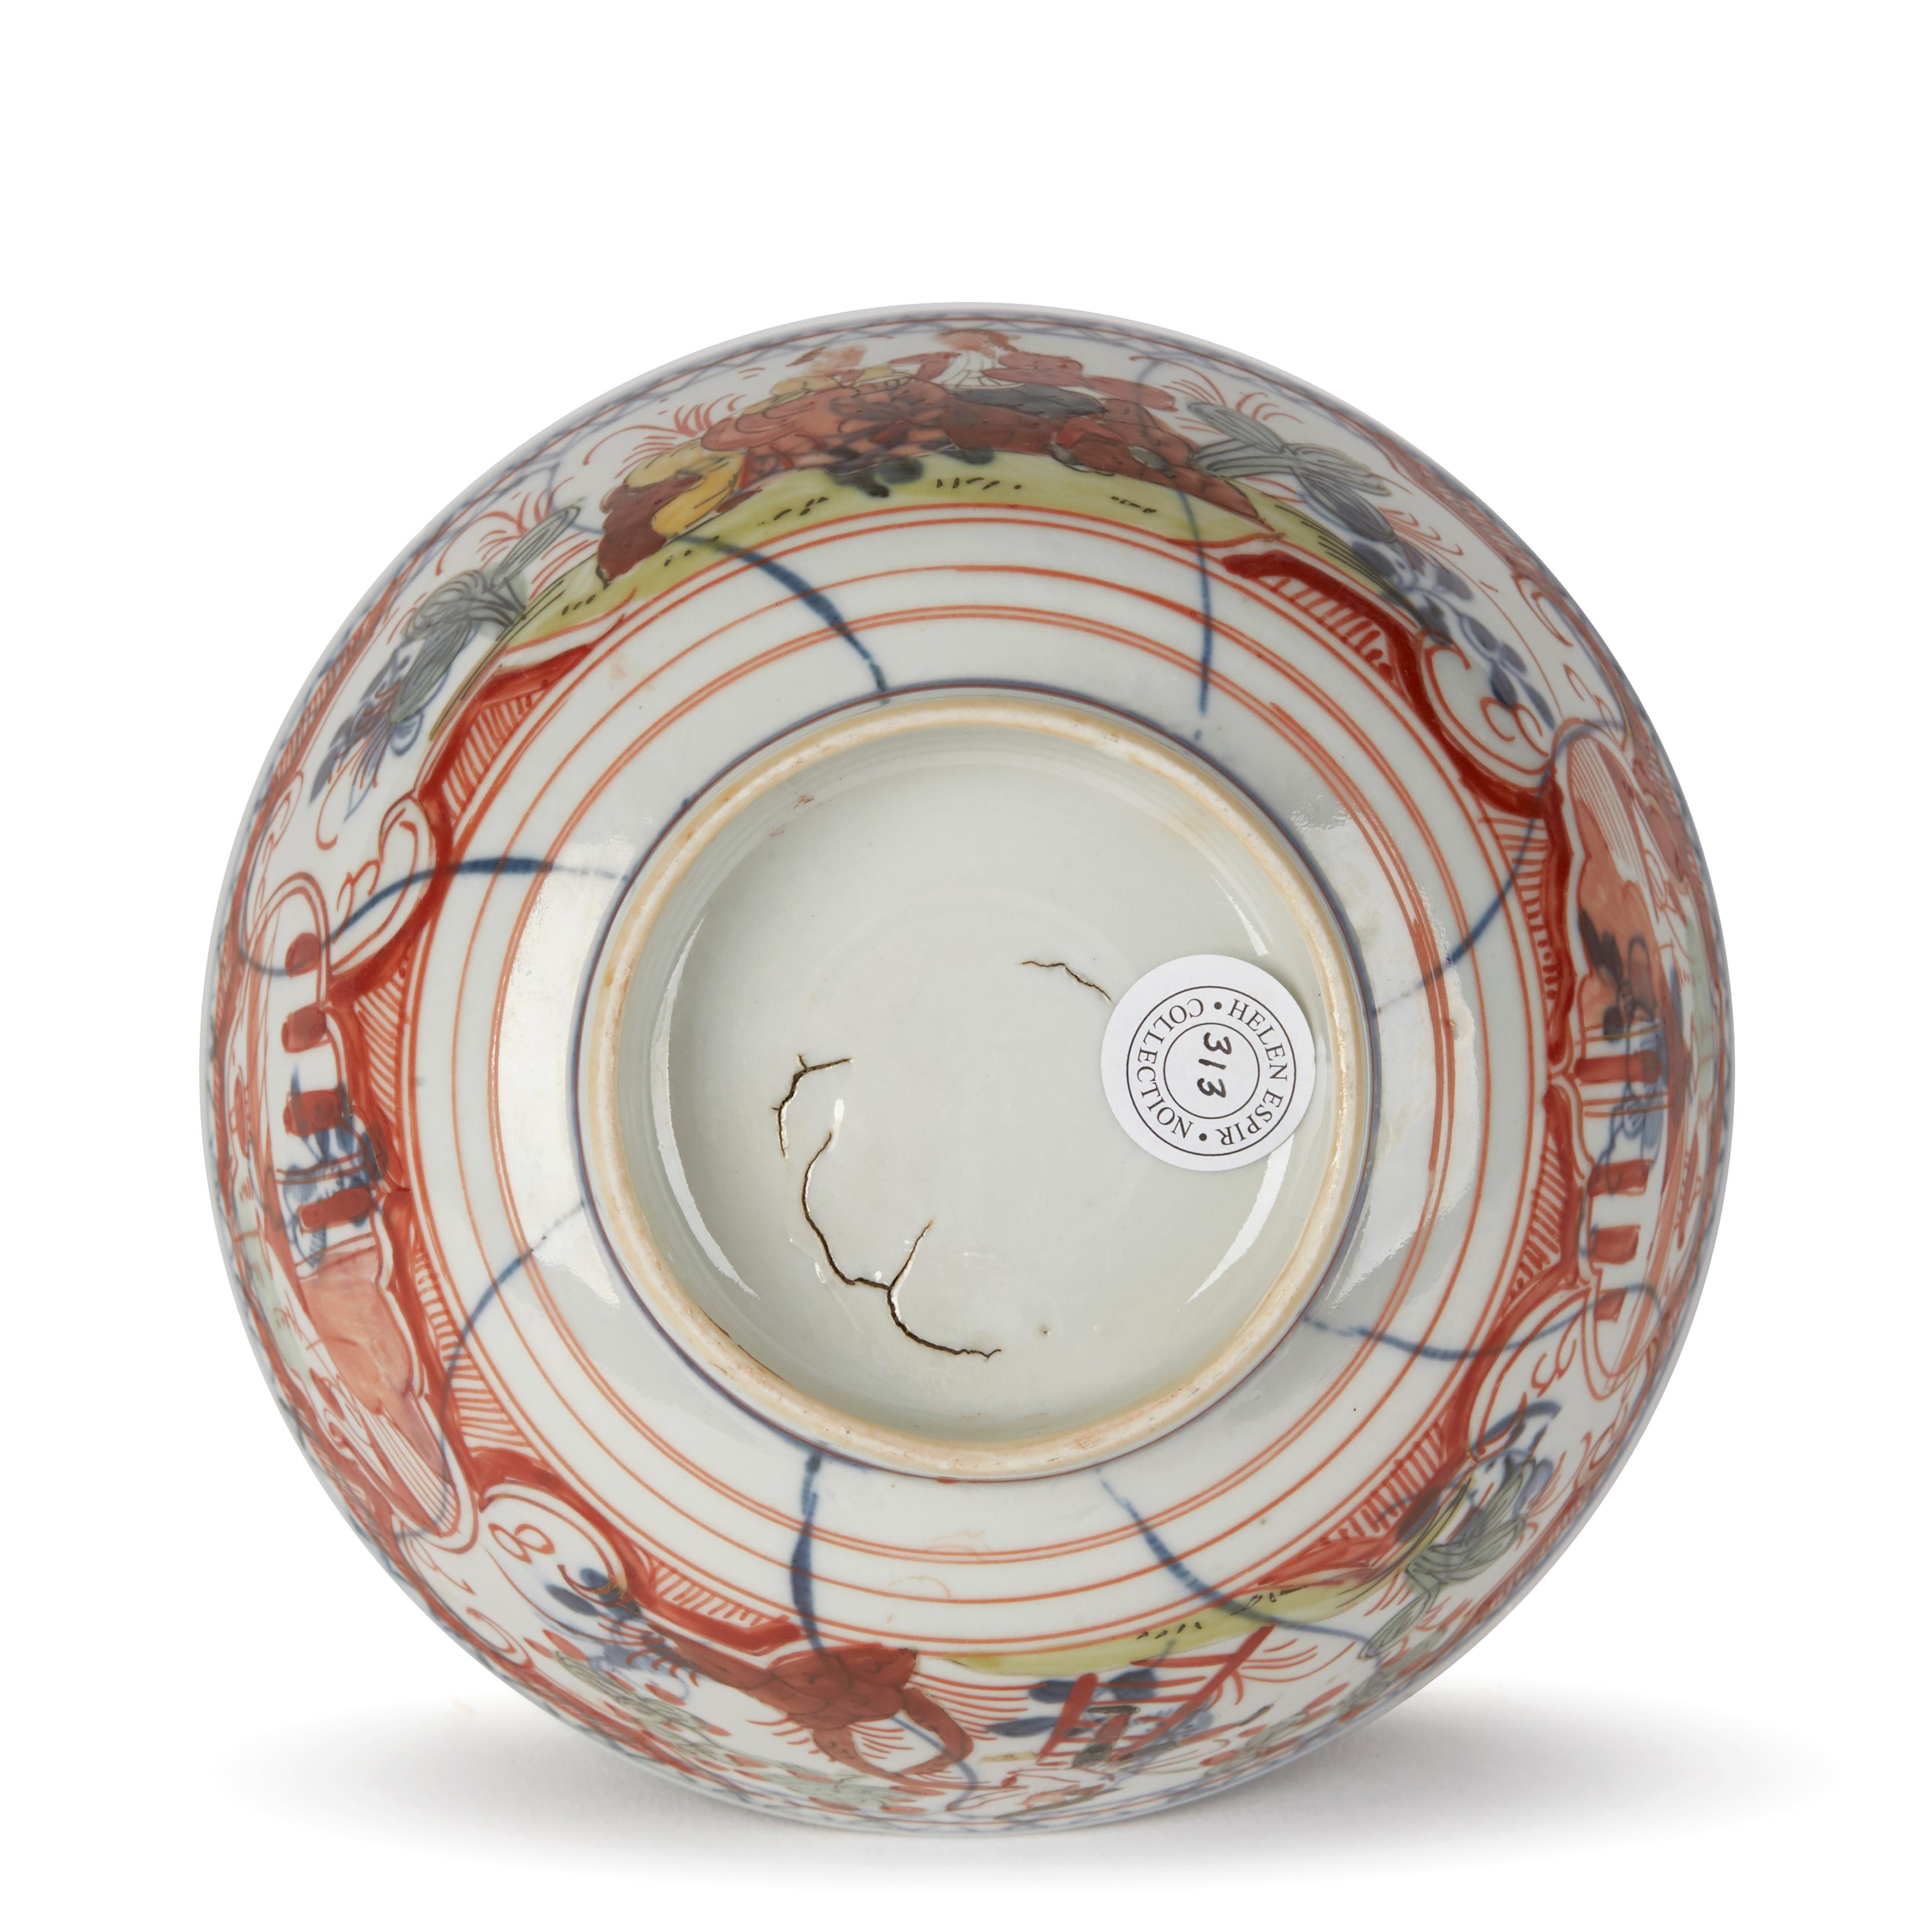 Chinese Overpainted Porcelain Bowl with Figures, 1720-1740